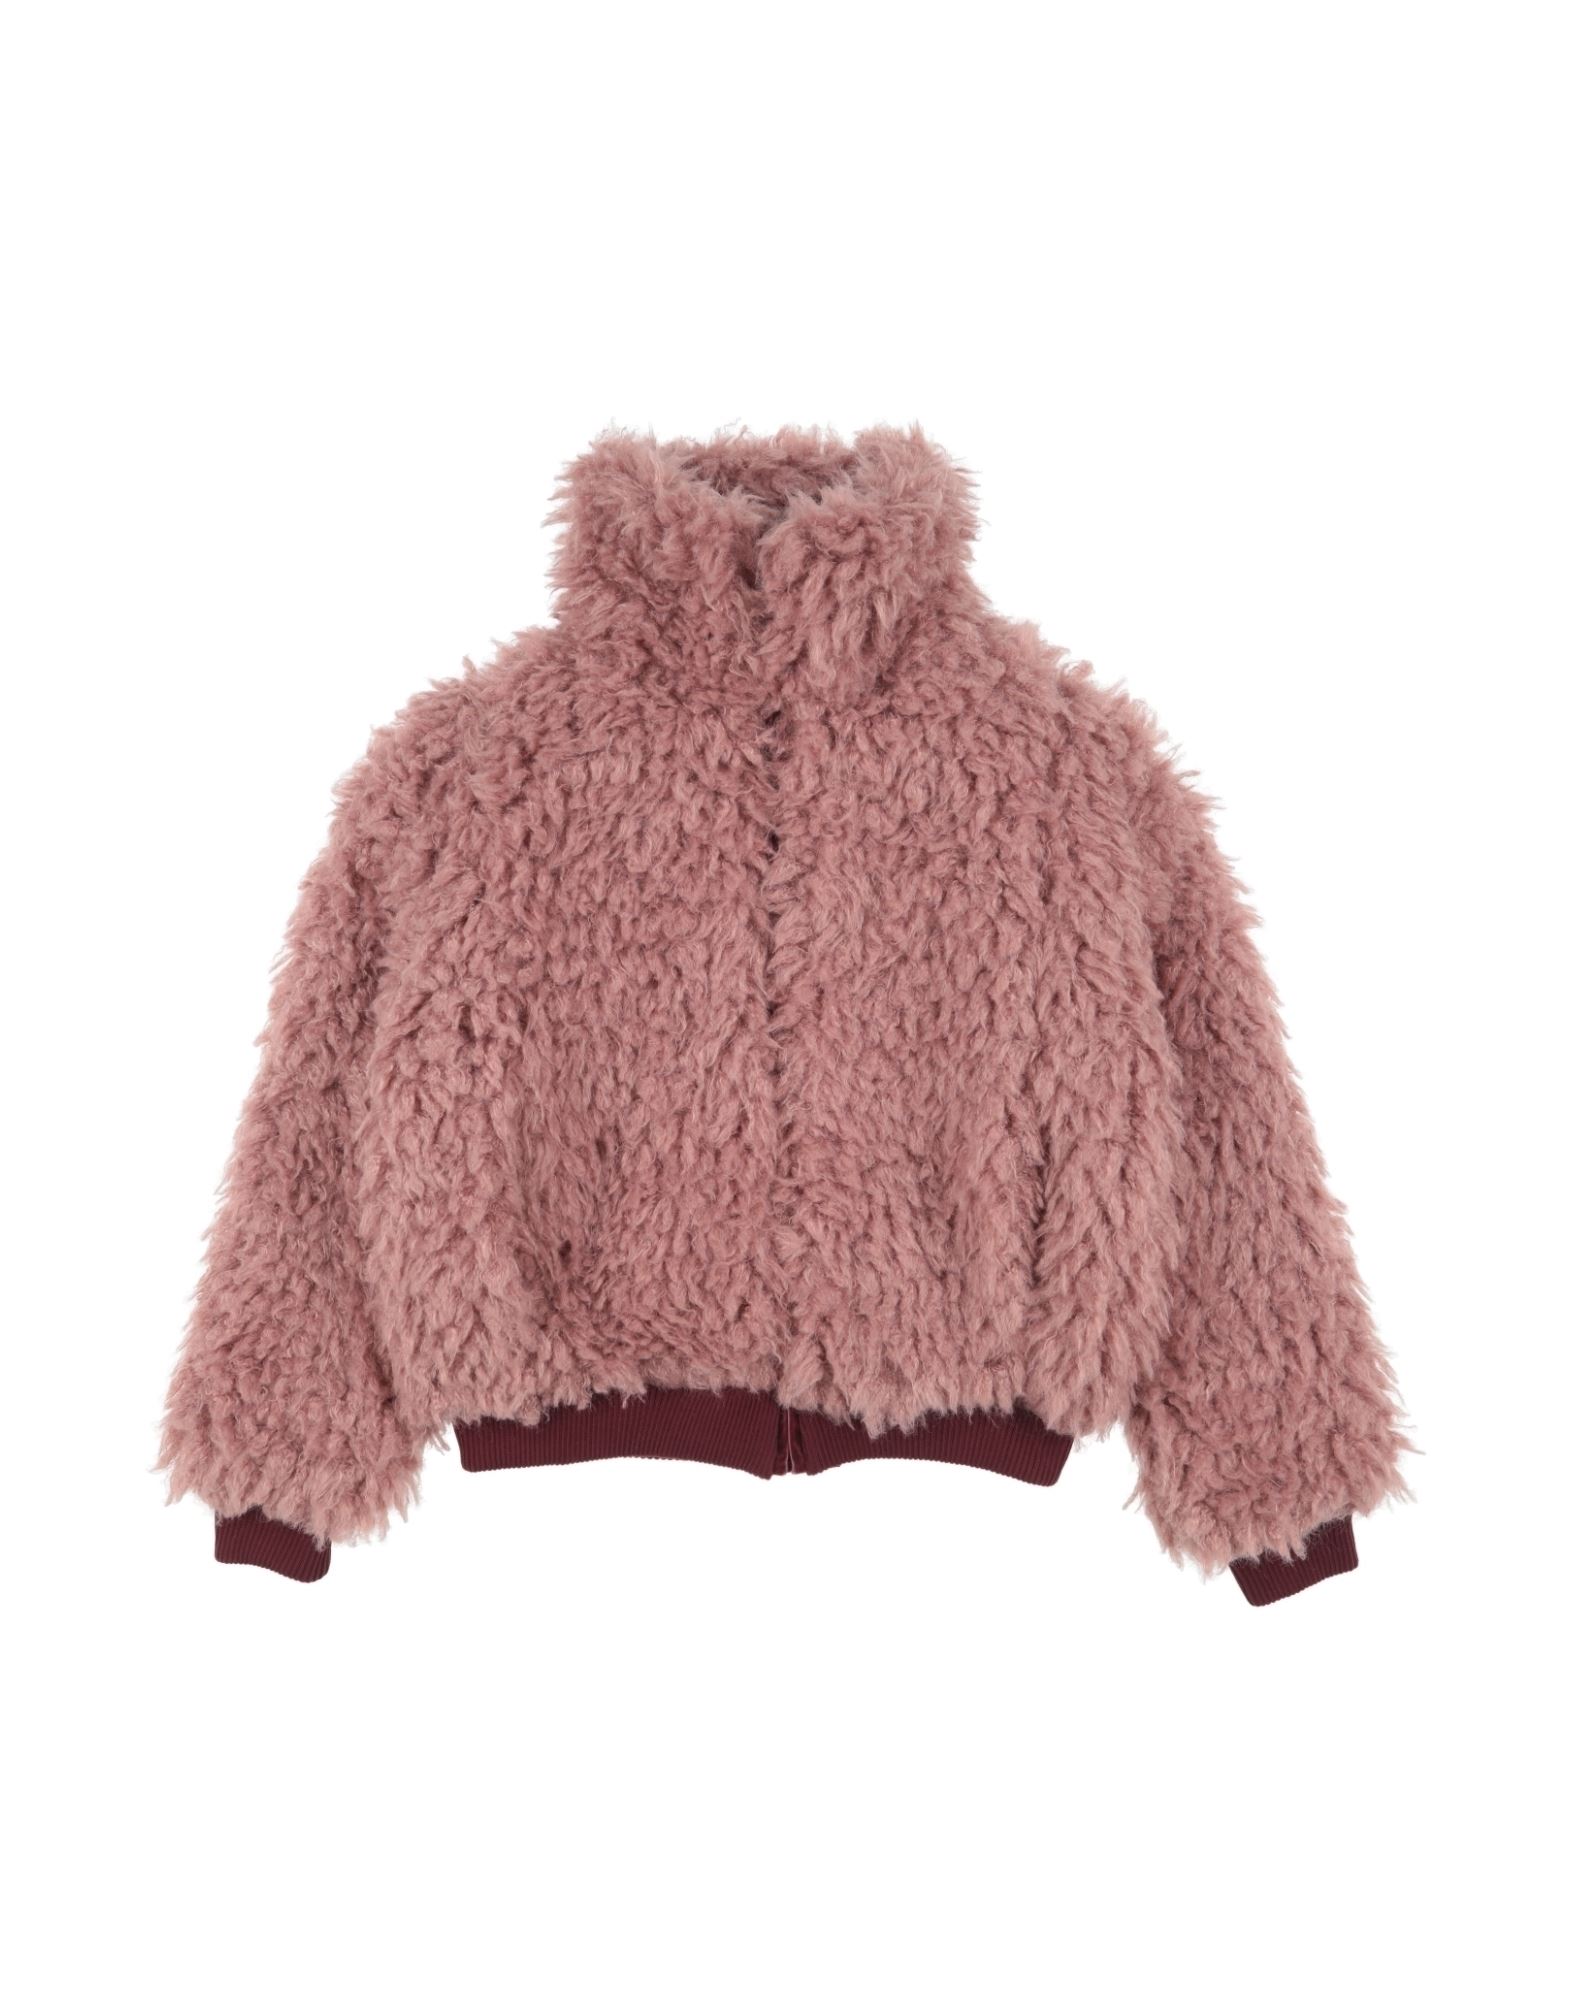 HAPPINESS Shearling- & Kunstfell Kinder Altrosa von HAPPINESS